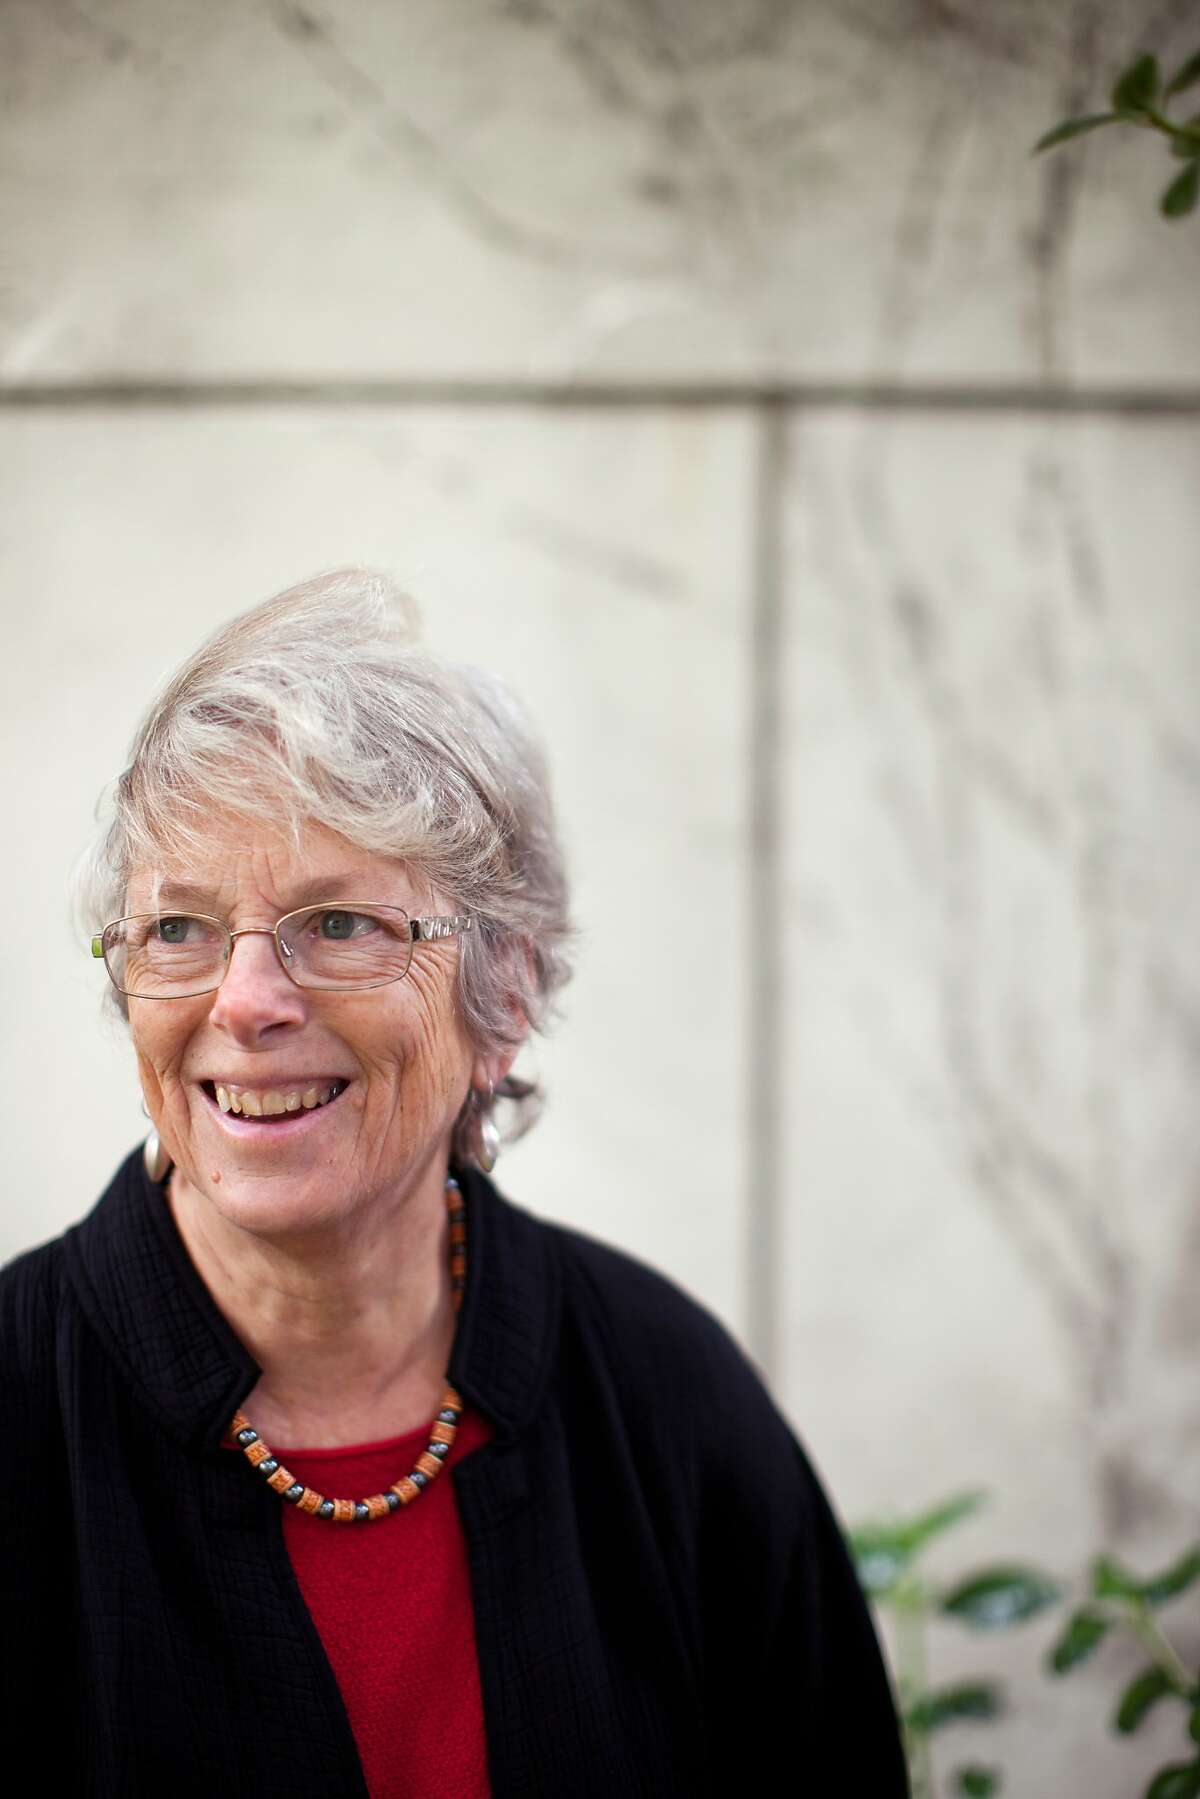 UC Berkeley law professor Pamela Samuelson is a founding member of the Authors Alliance, a new nonprofit advocacy group for authors pushing for copyright reform and better public access to published works. She is photographed outside her apartment in San Francisco on Friday, May 23. 2014.